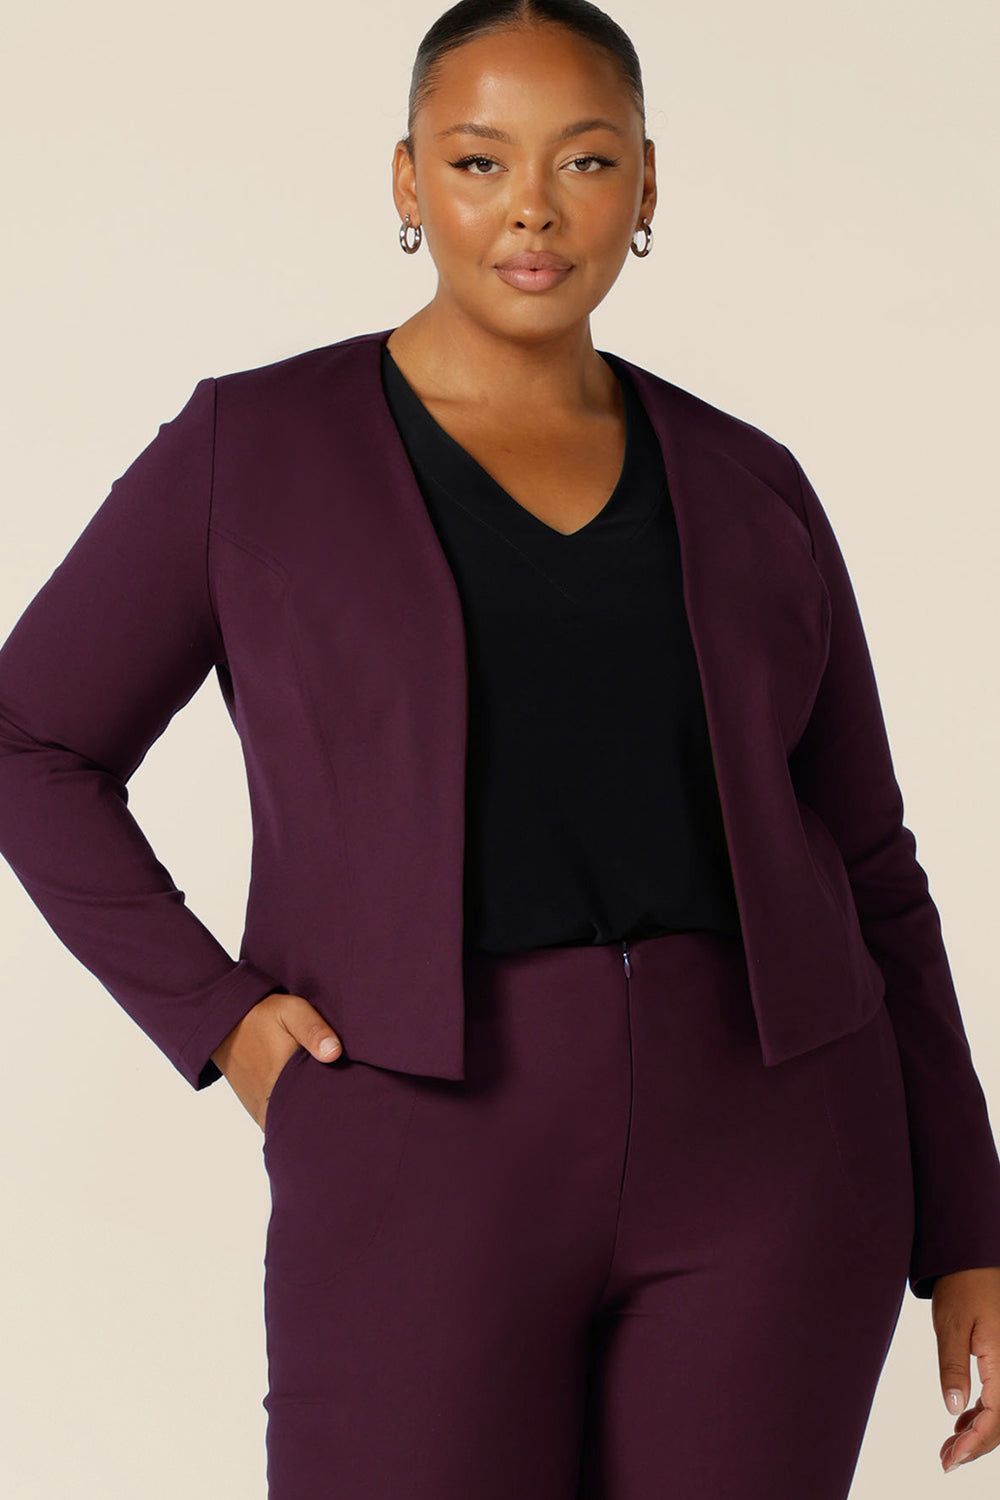 A good workwear jacket for plus size women, the Mackenzie Jacket in Mulberry is available to shop in sizes 8 to 24. Made in Australia by Australian and New Zealand womenswear brand, L&F, this work jacket is a collarless, open fronted with long sleeves and an angled hem. 